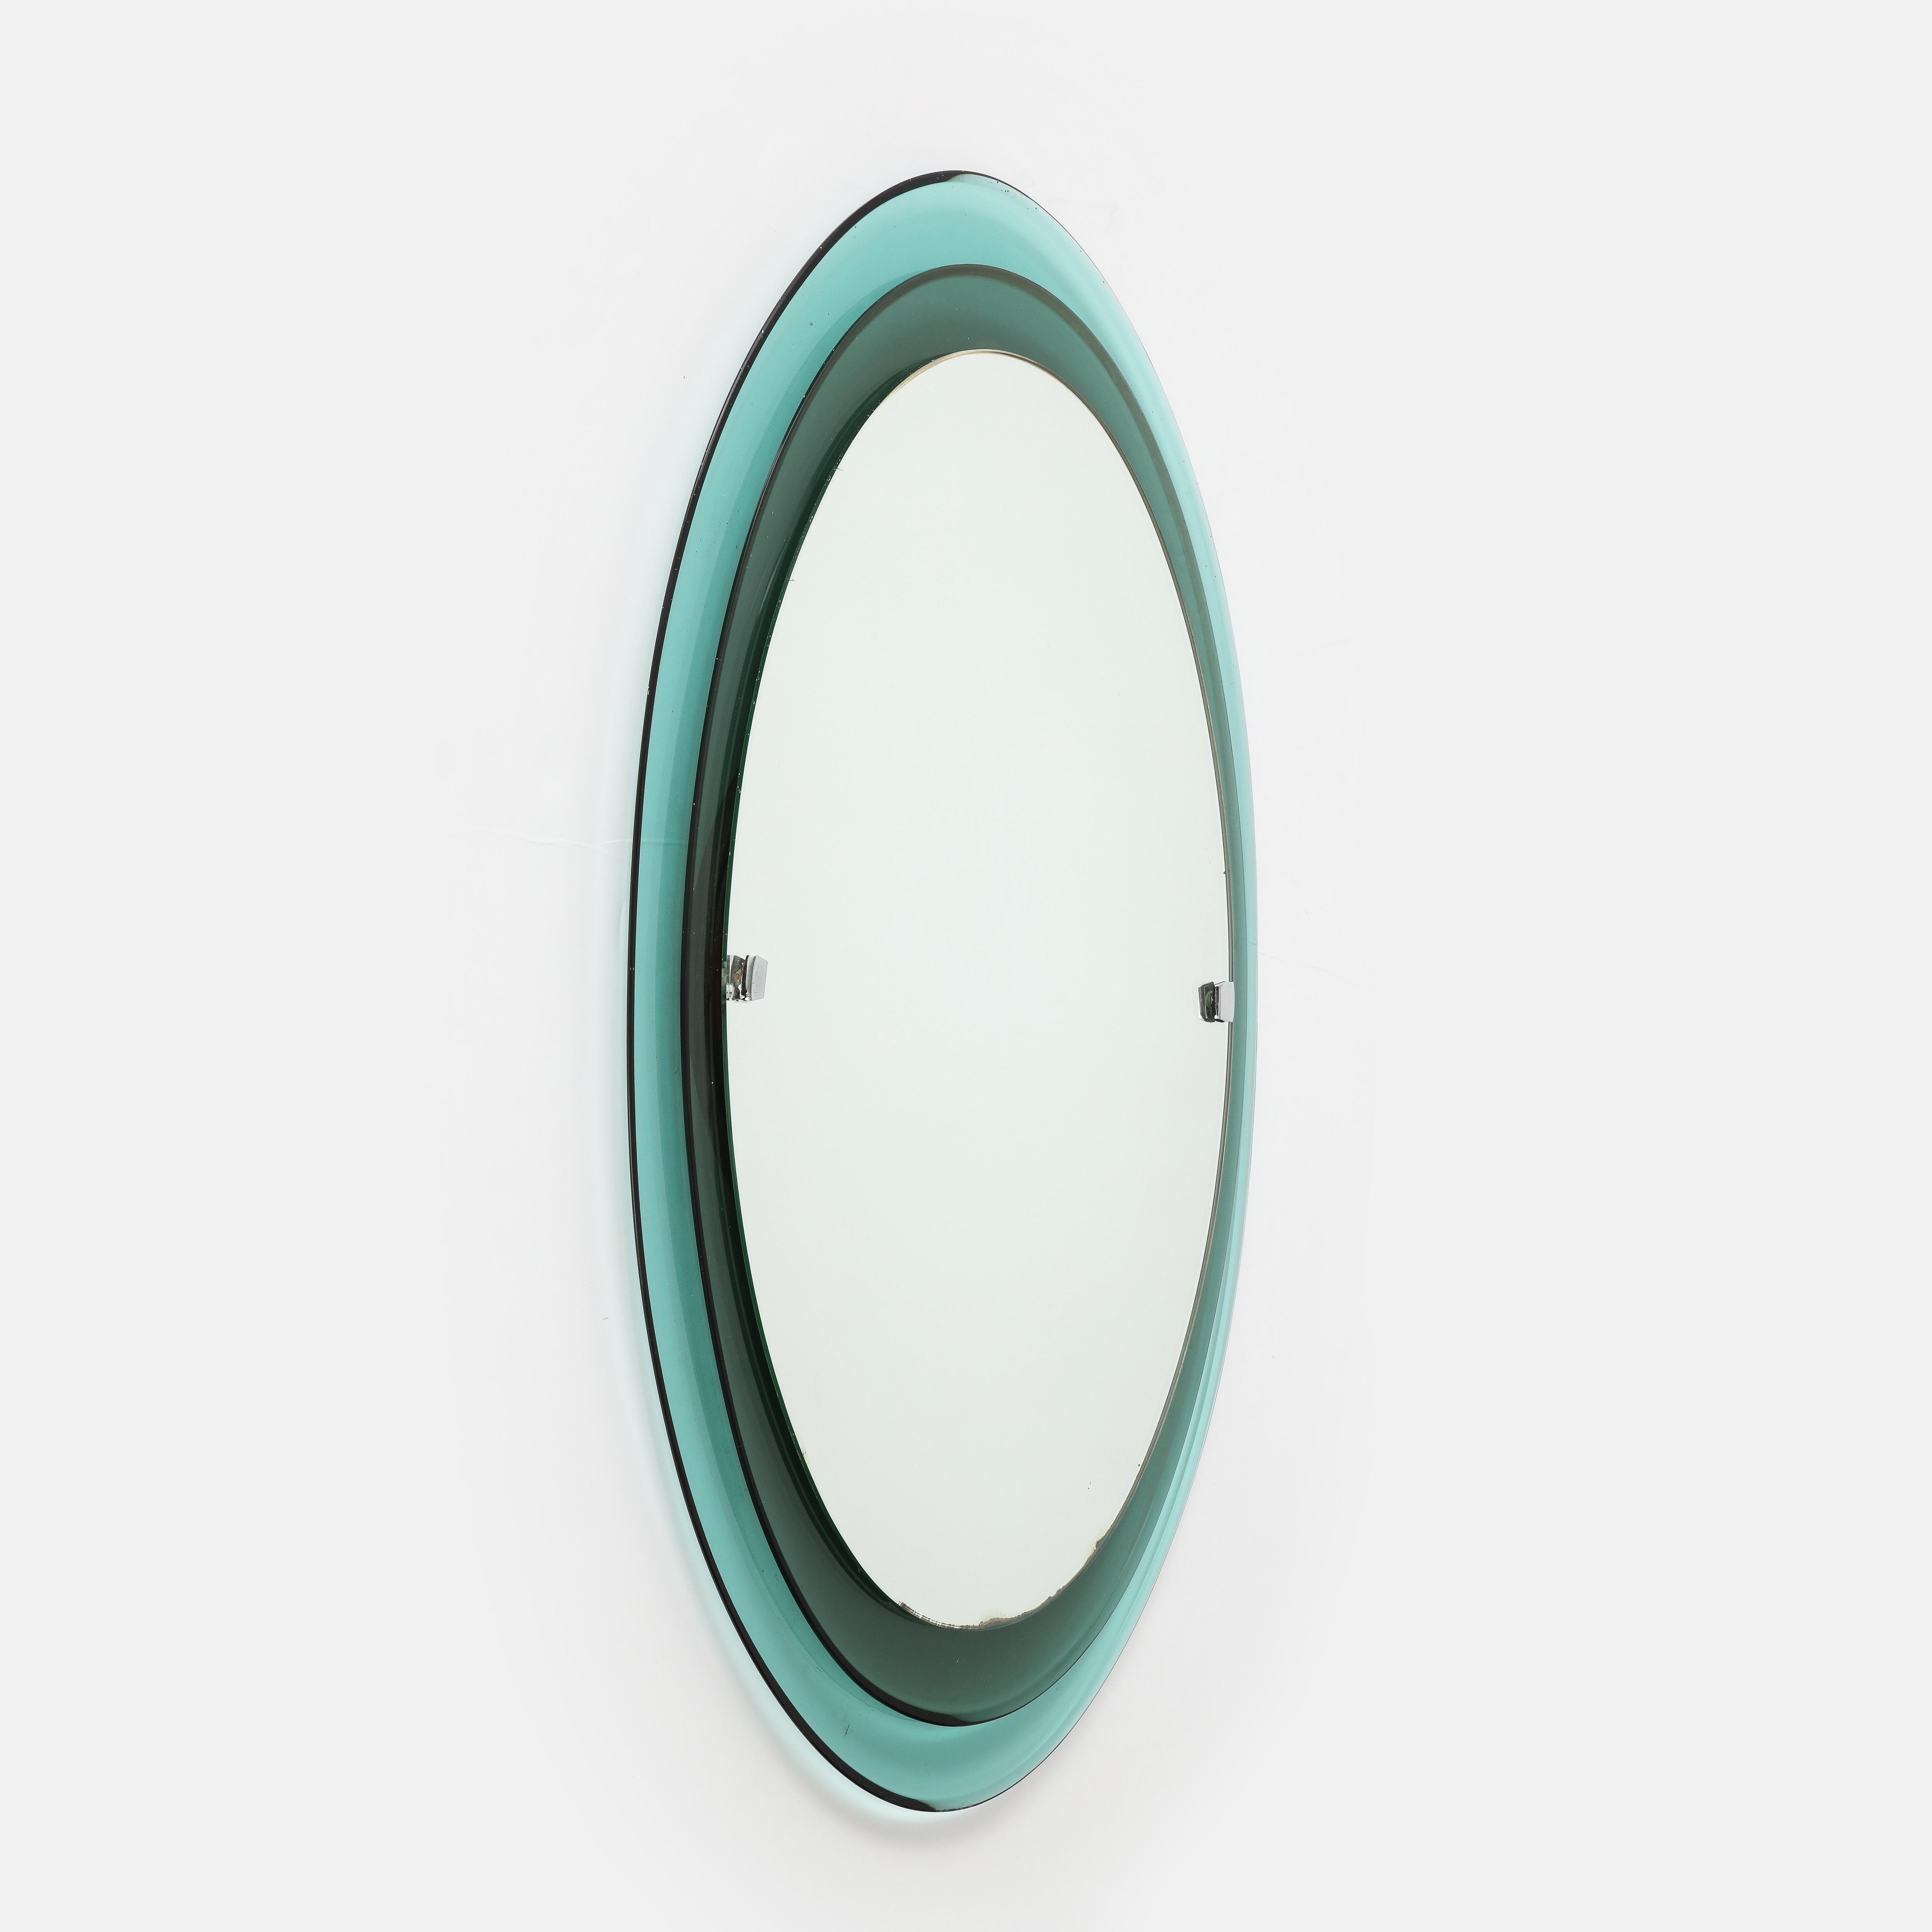 Max Ingrand Fontana Arte rare oval crystal mirror model 2046 consisting of two tiers of colored, curved and beveled glass framing mirrored glass with nickel-plated metal mounts, Italy, 1960s. Manufacturer’s label Fontanit on wood backing of